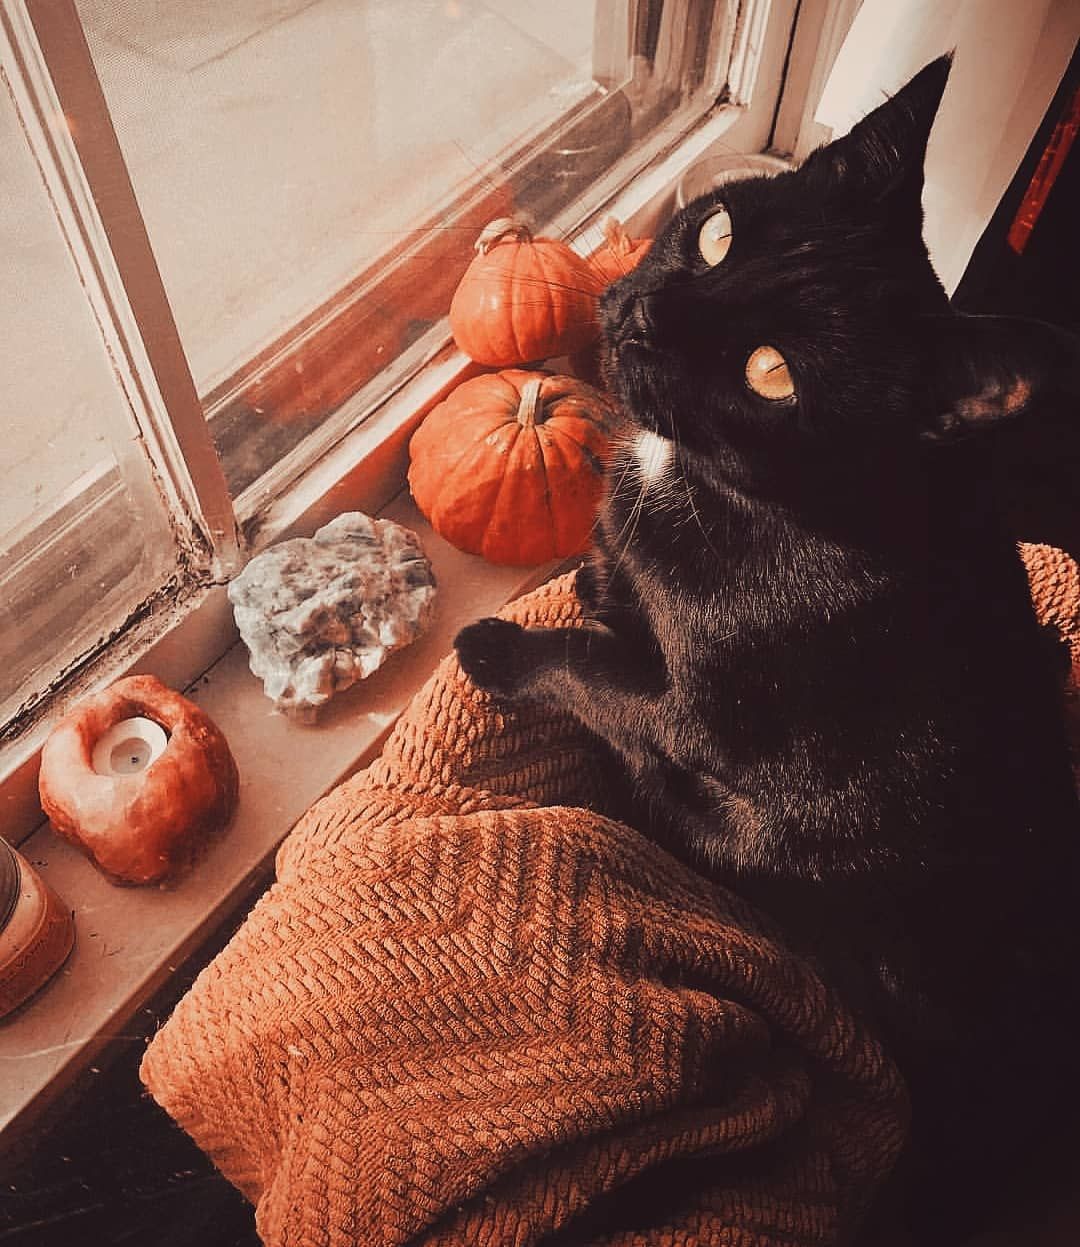 FALL WORLD on Instagram: “I love the black cats